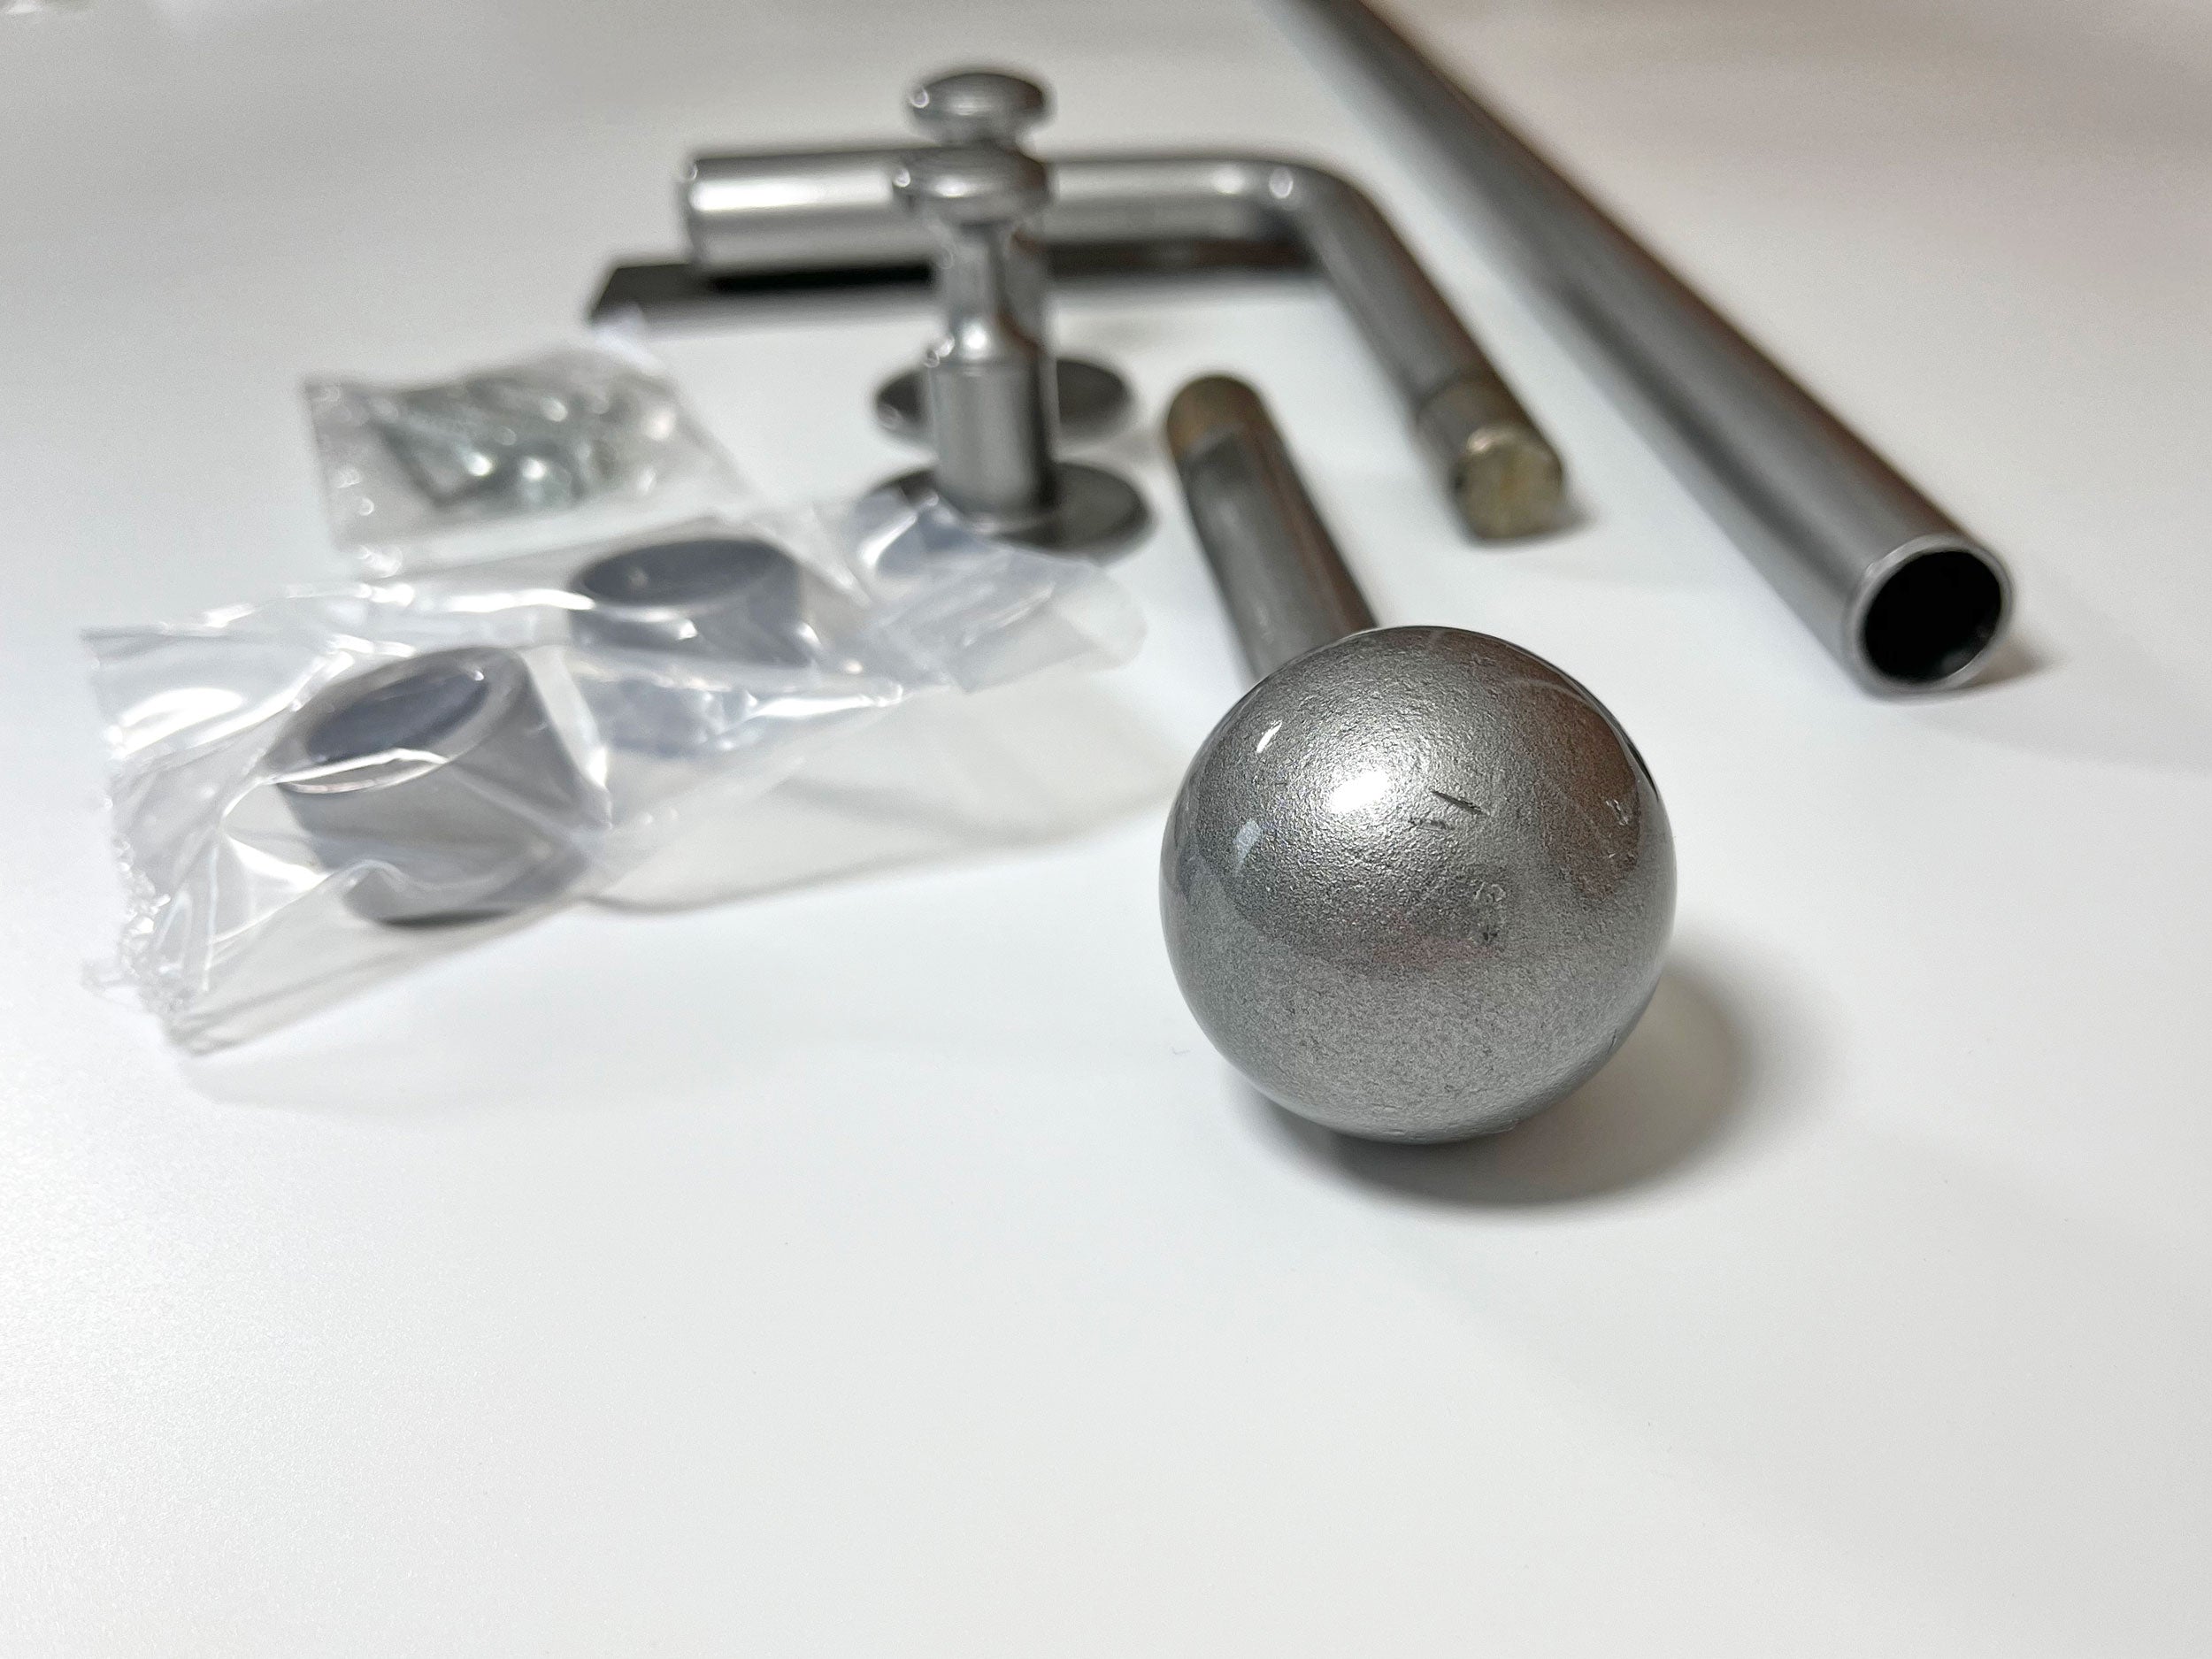 19mm Metal Portiere Rod with Ball finial in Pewter finish - without rings